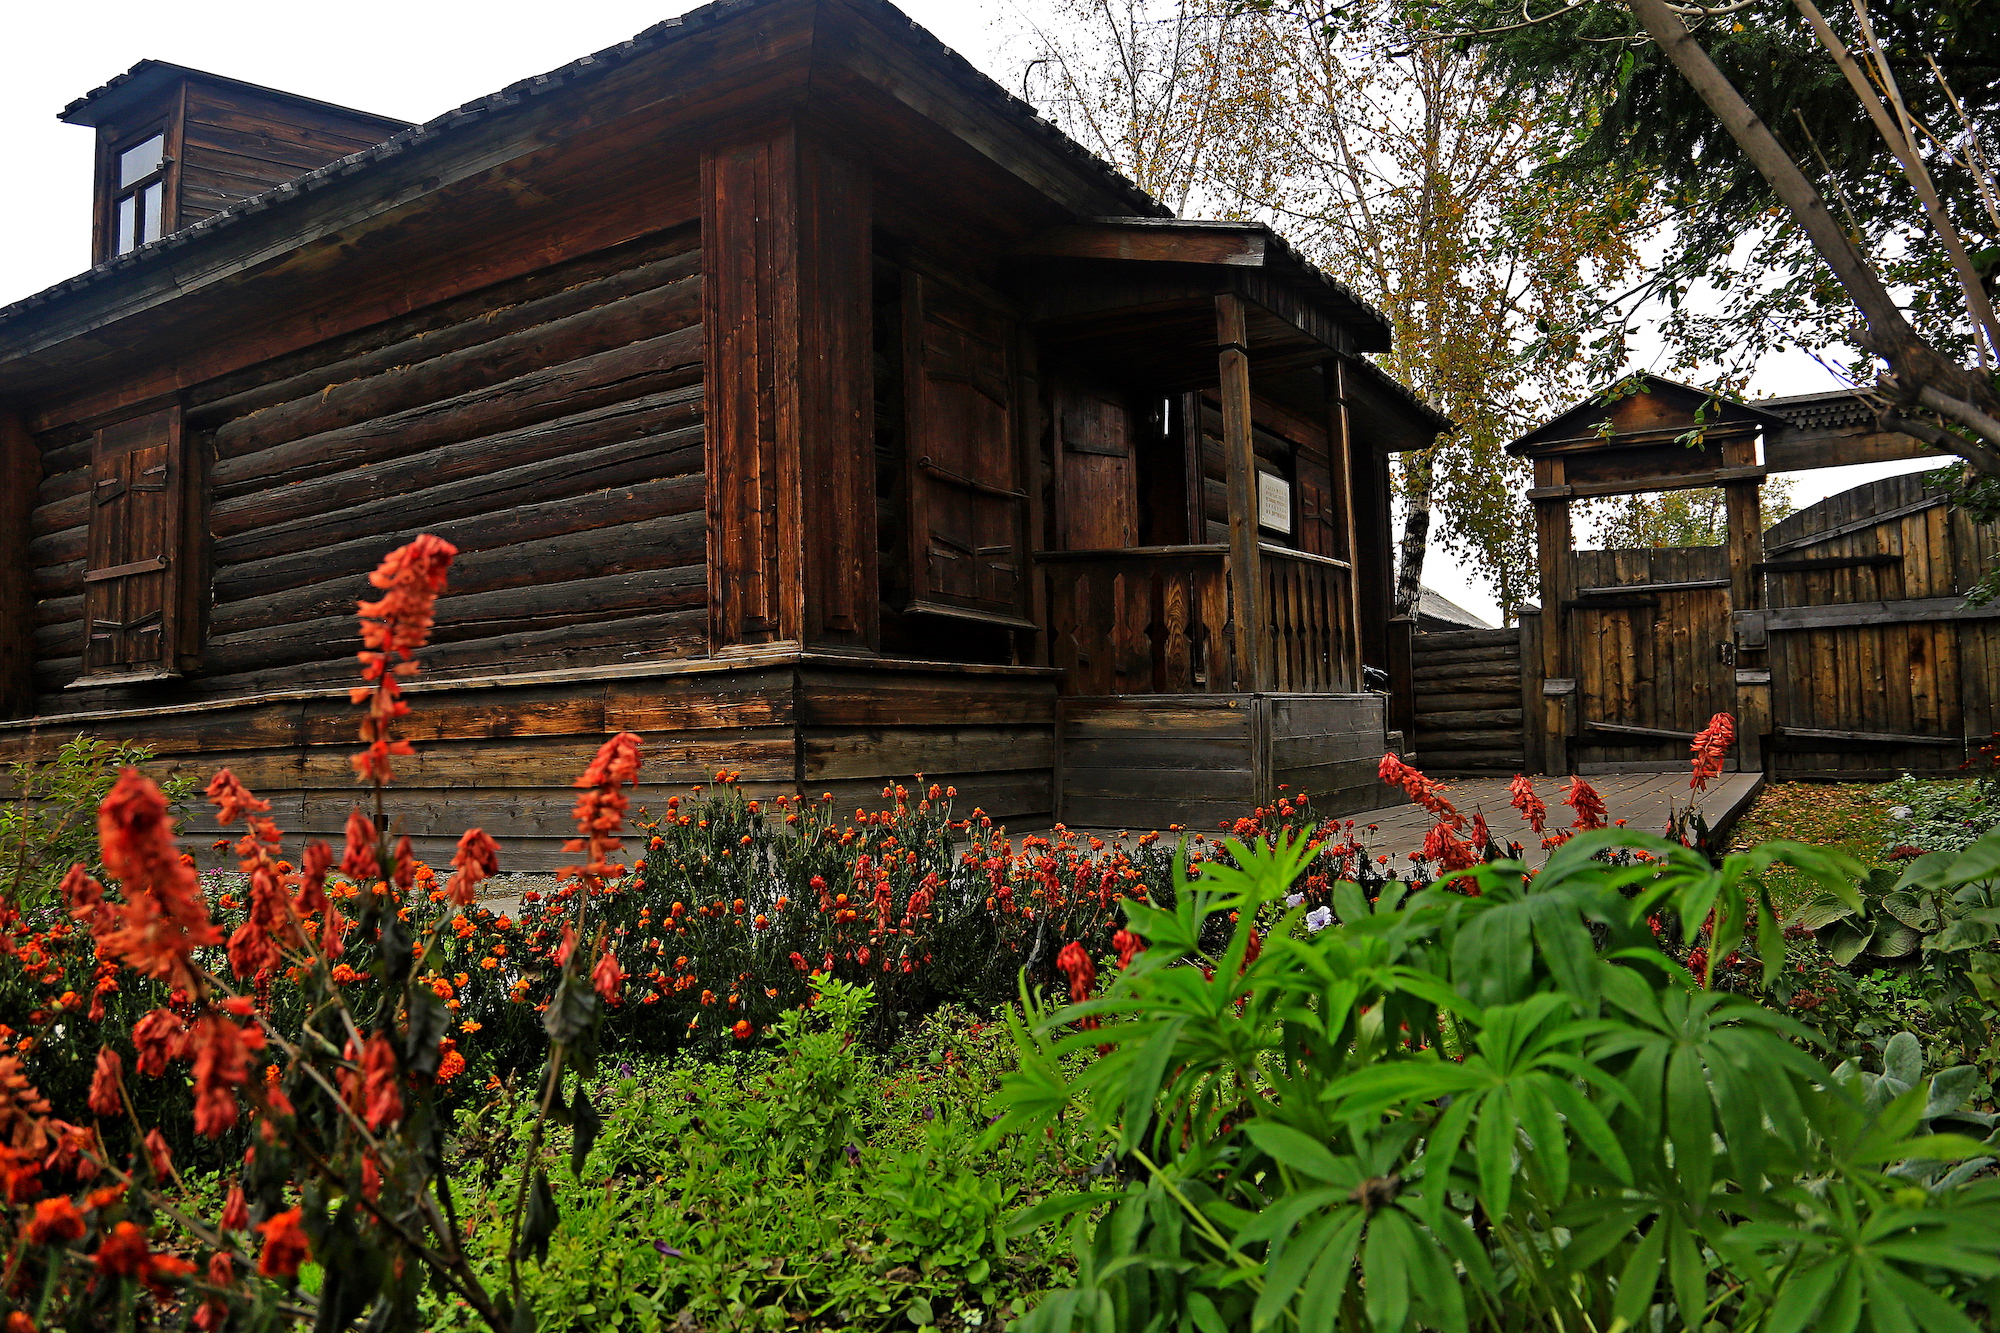 A dark wooden building among red flowers. 